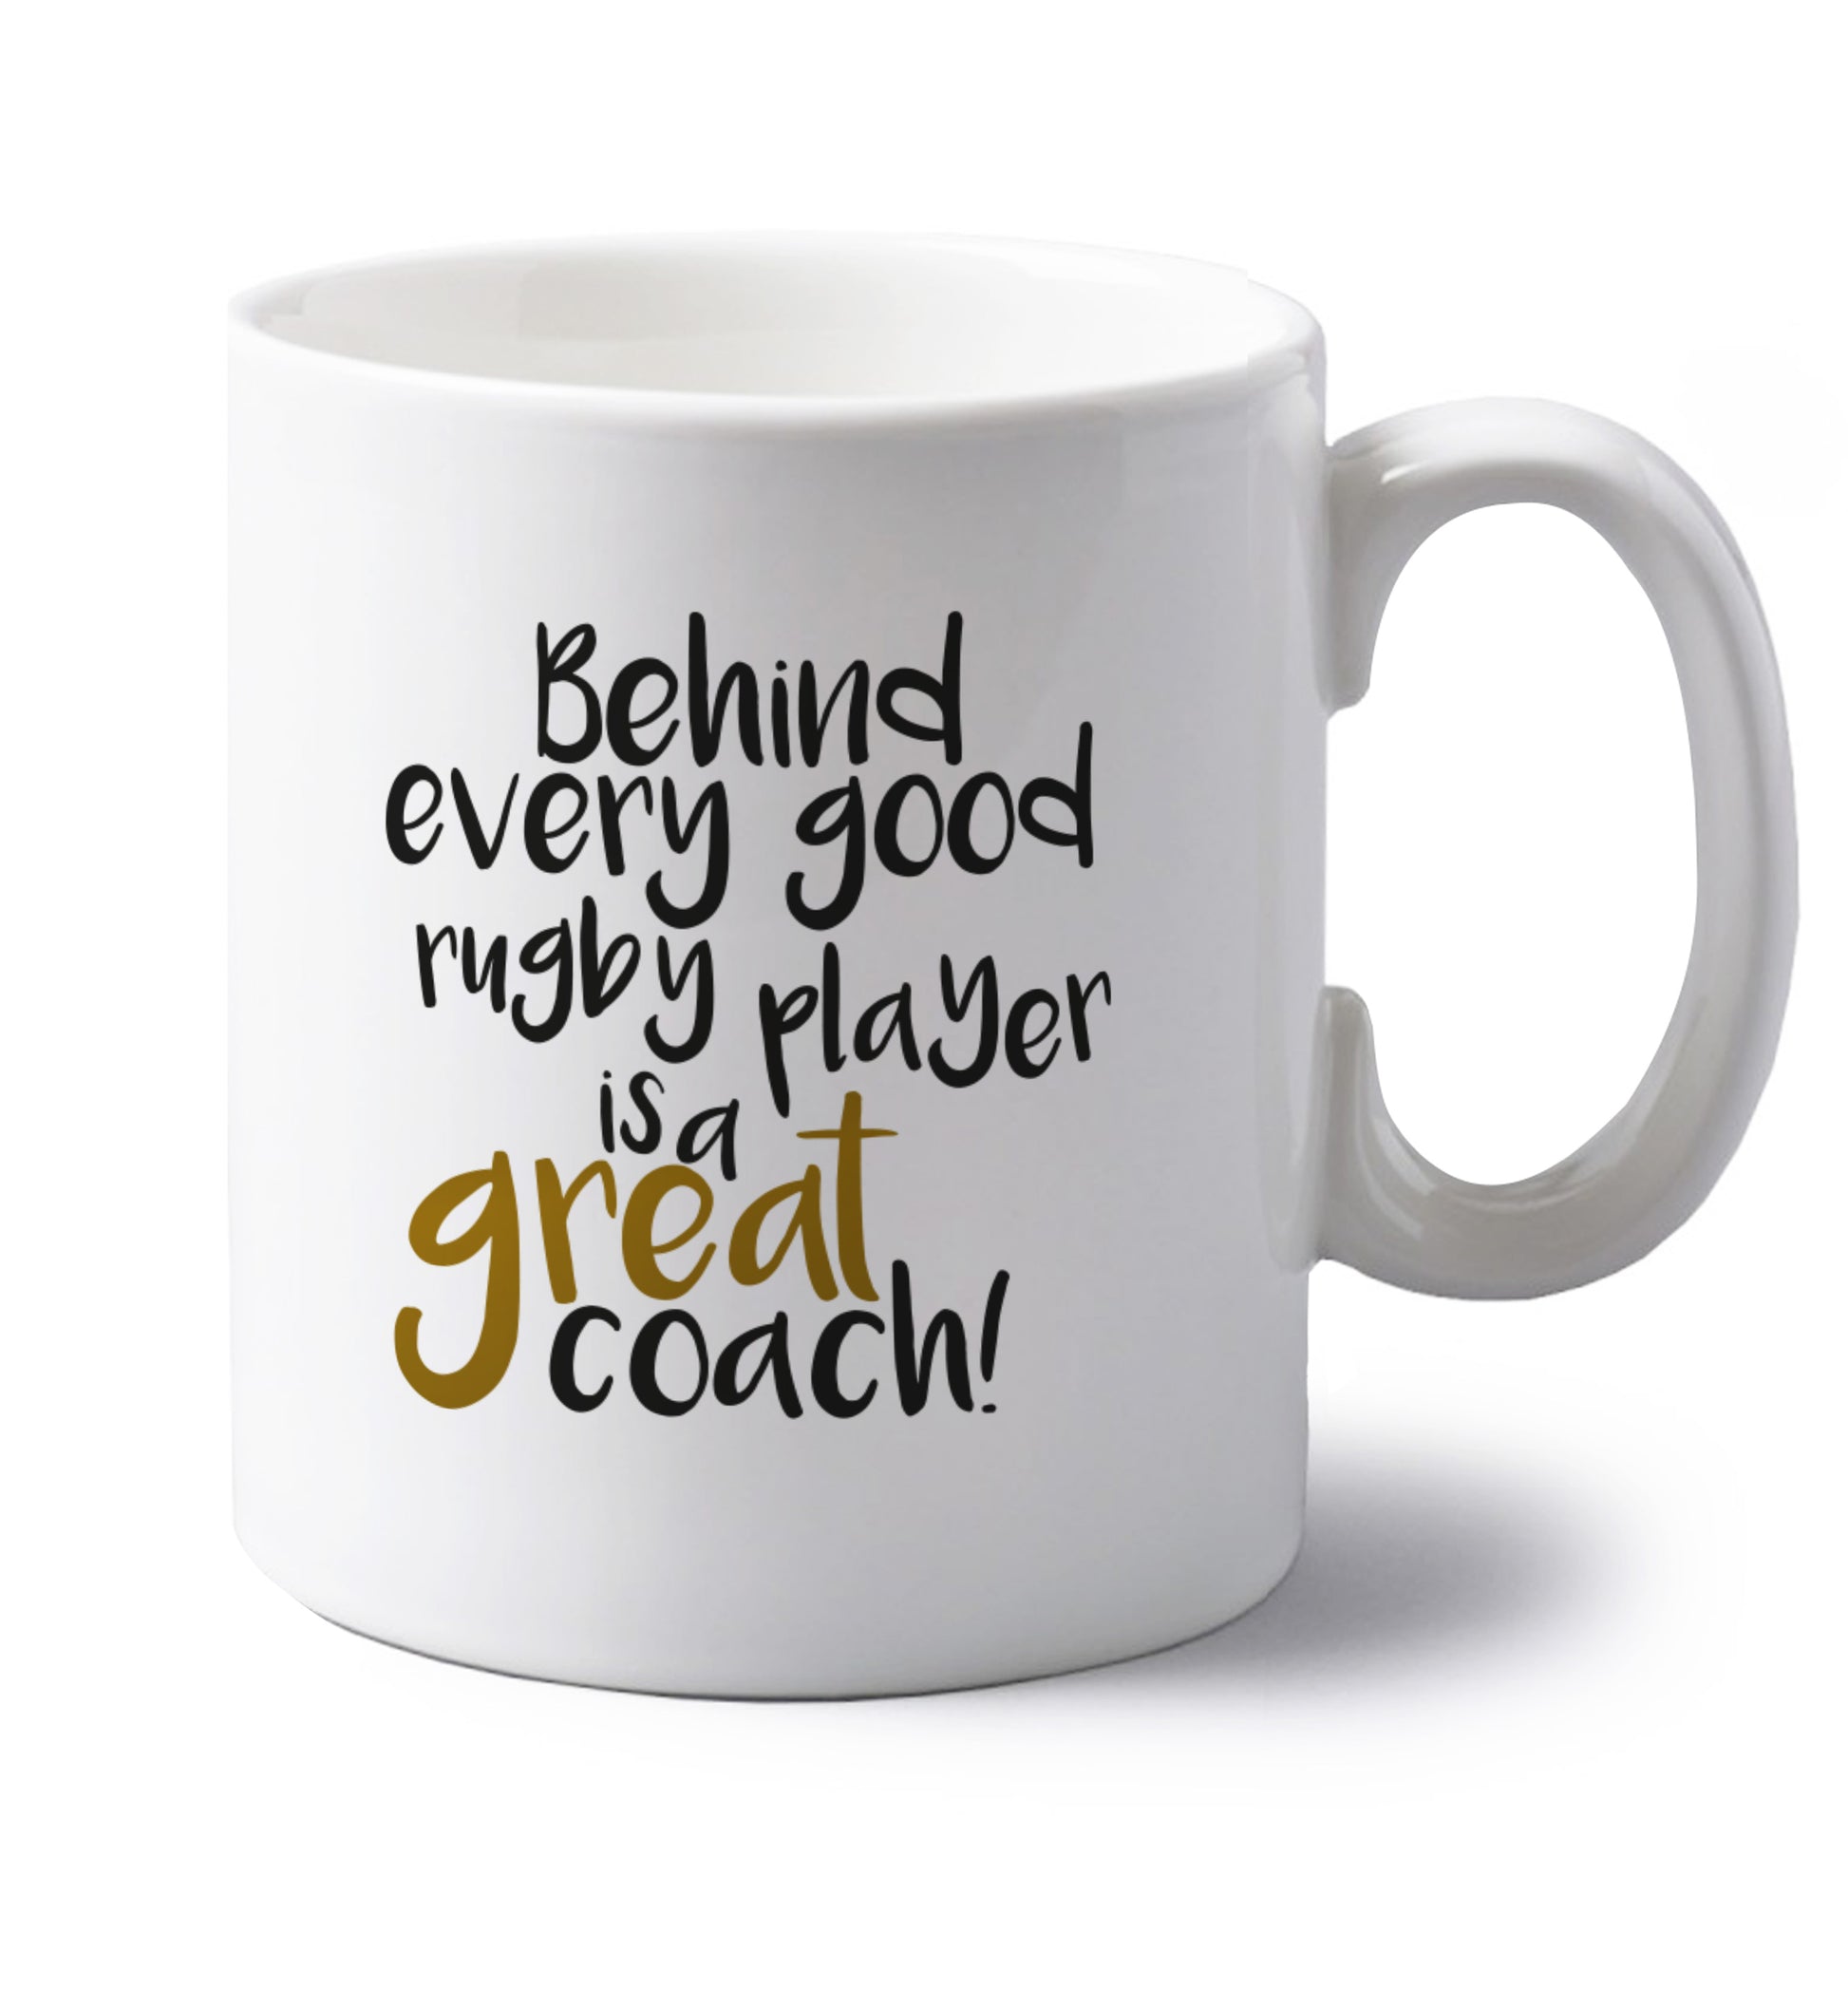 Behind every goor rugby player is a great coach left handed white ceramic mug 